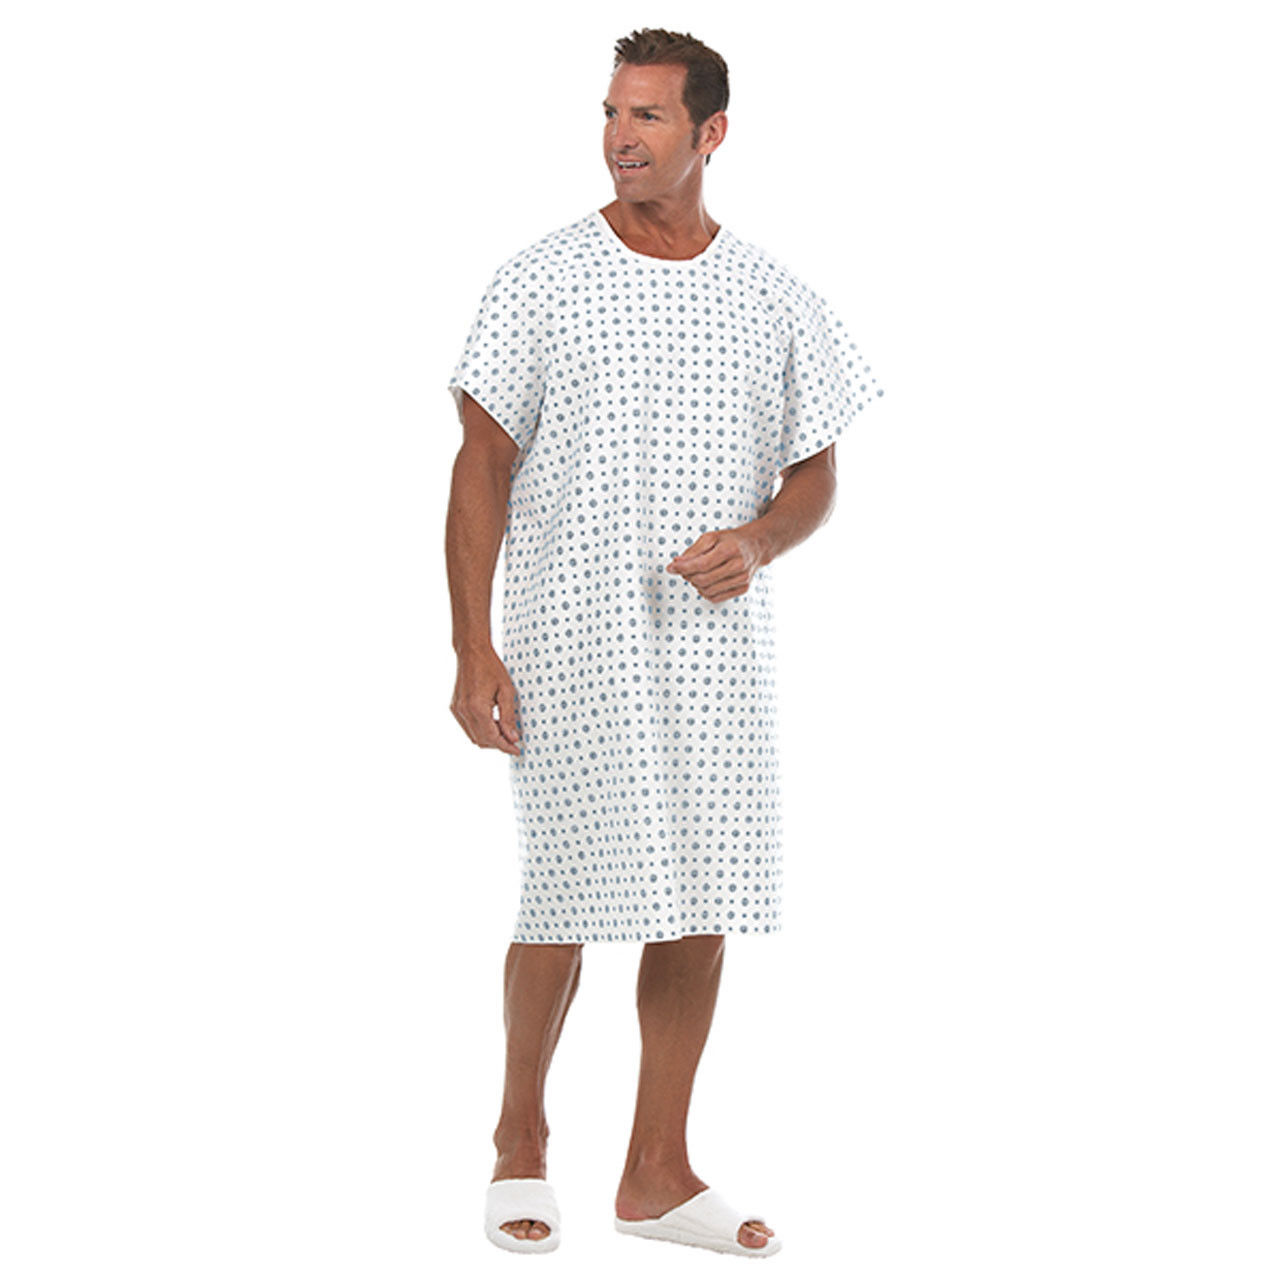 What's the material of the bulk surgical gown I'm planning to purchase?